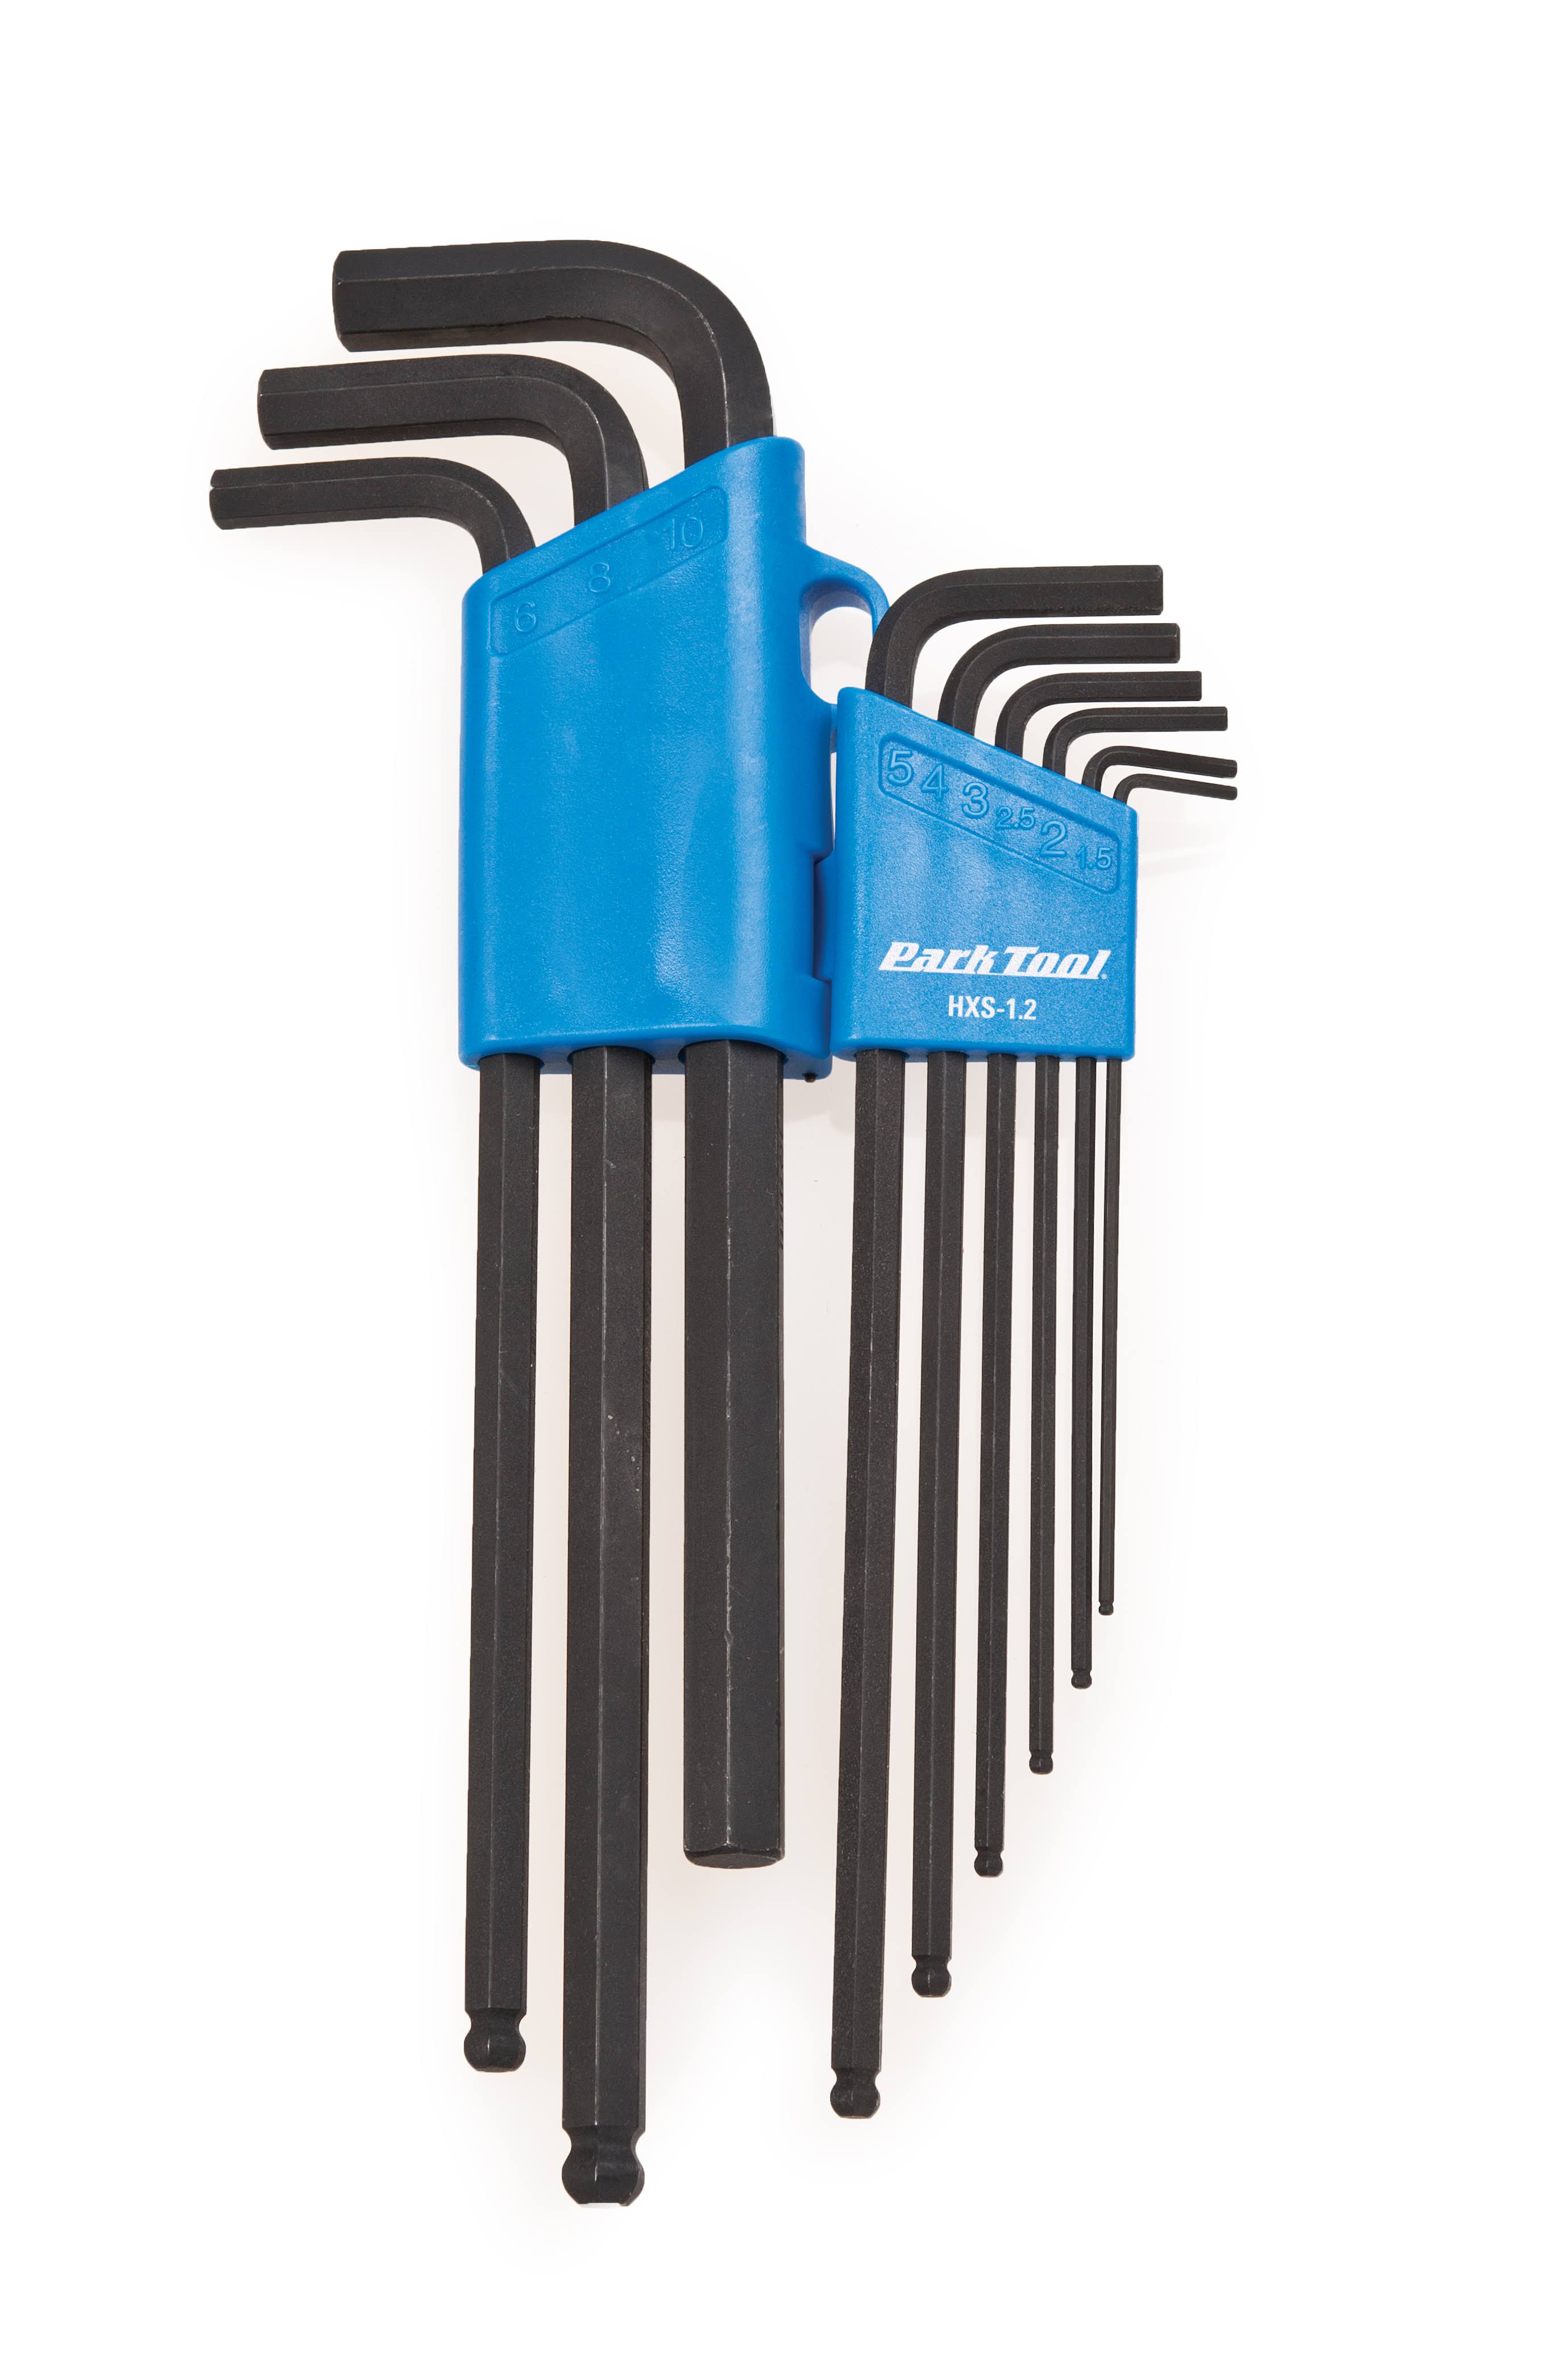 Park Tool Professional Hex Wrench Set